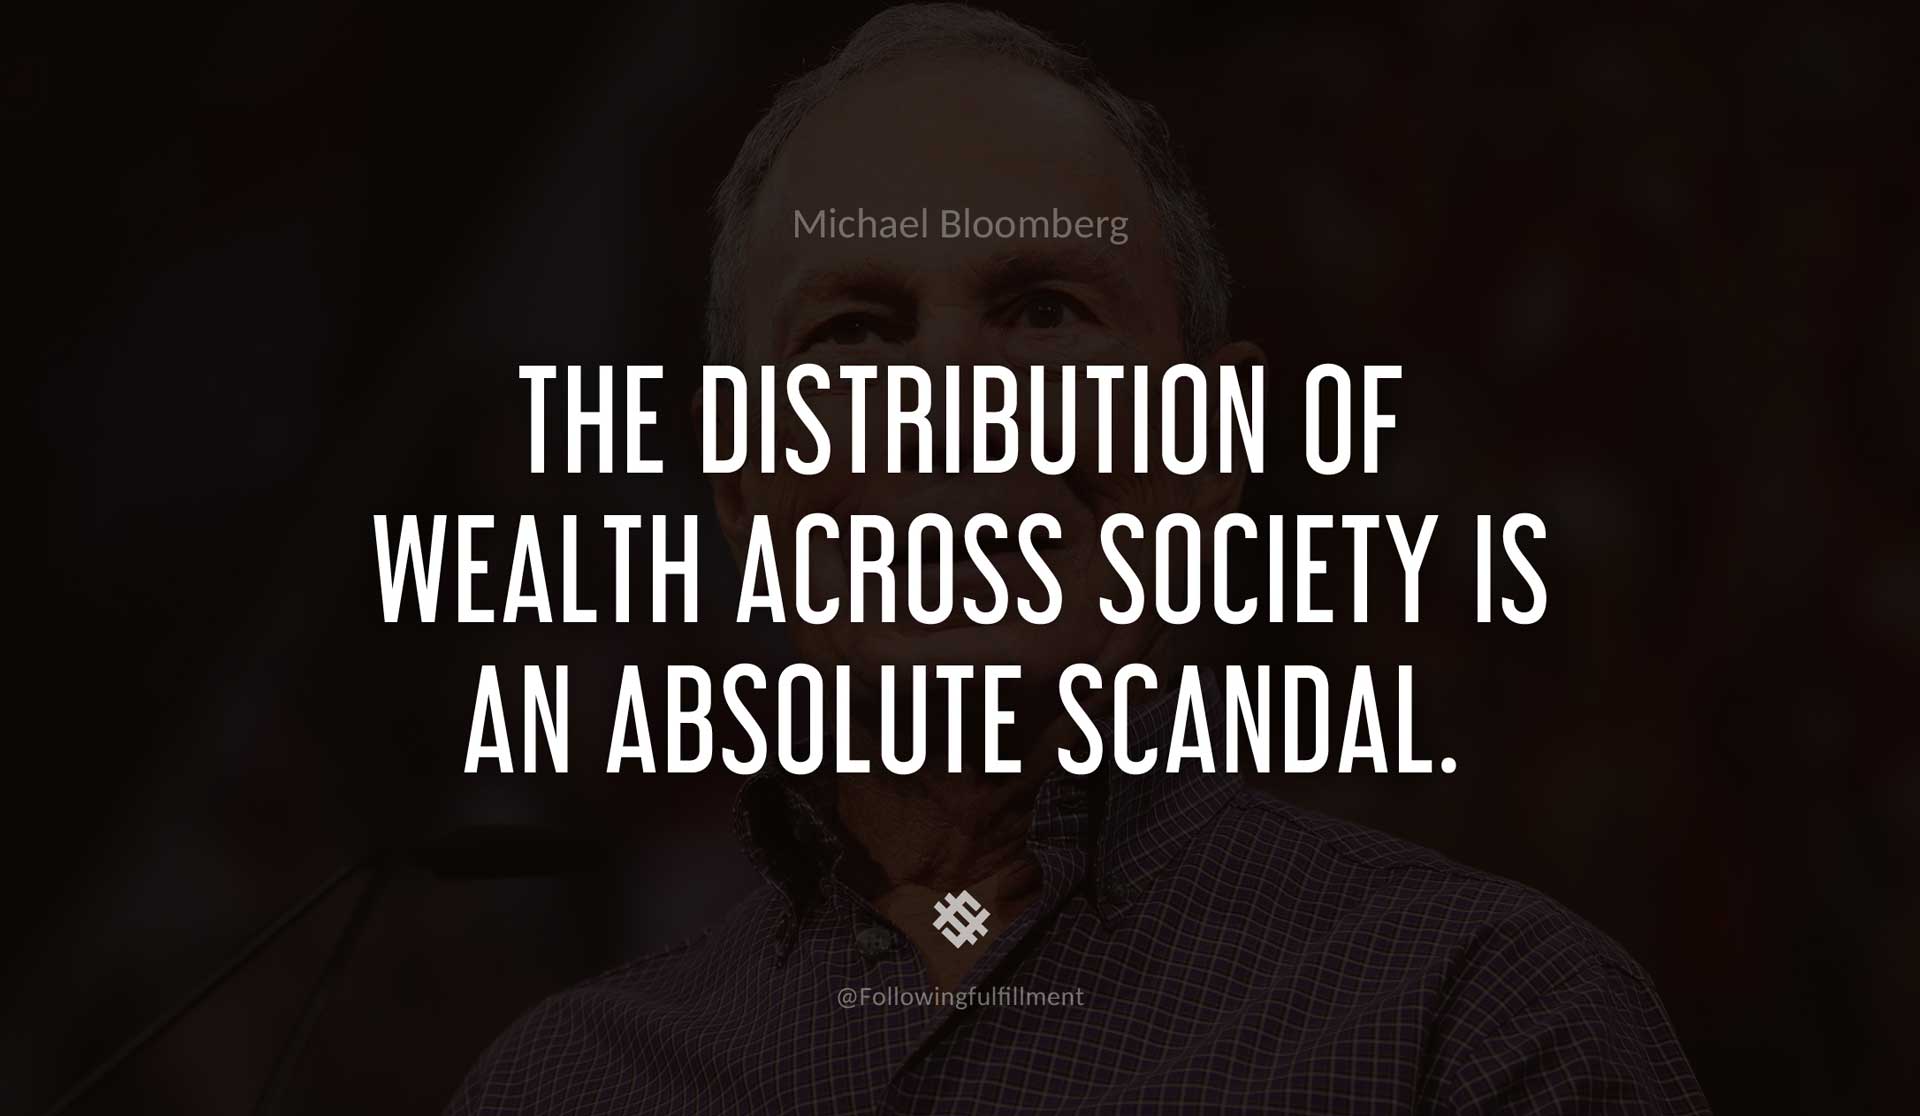 The-distribution-of-wealth-across-society-is-an-absolute-scandal.-MICHAEL-BLOOMBERG-Quote.jpg